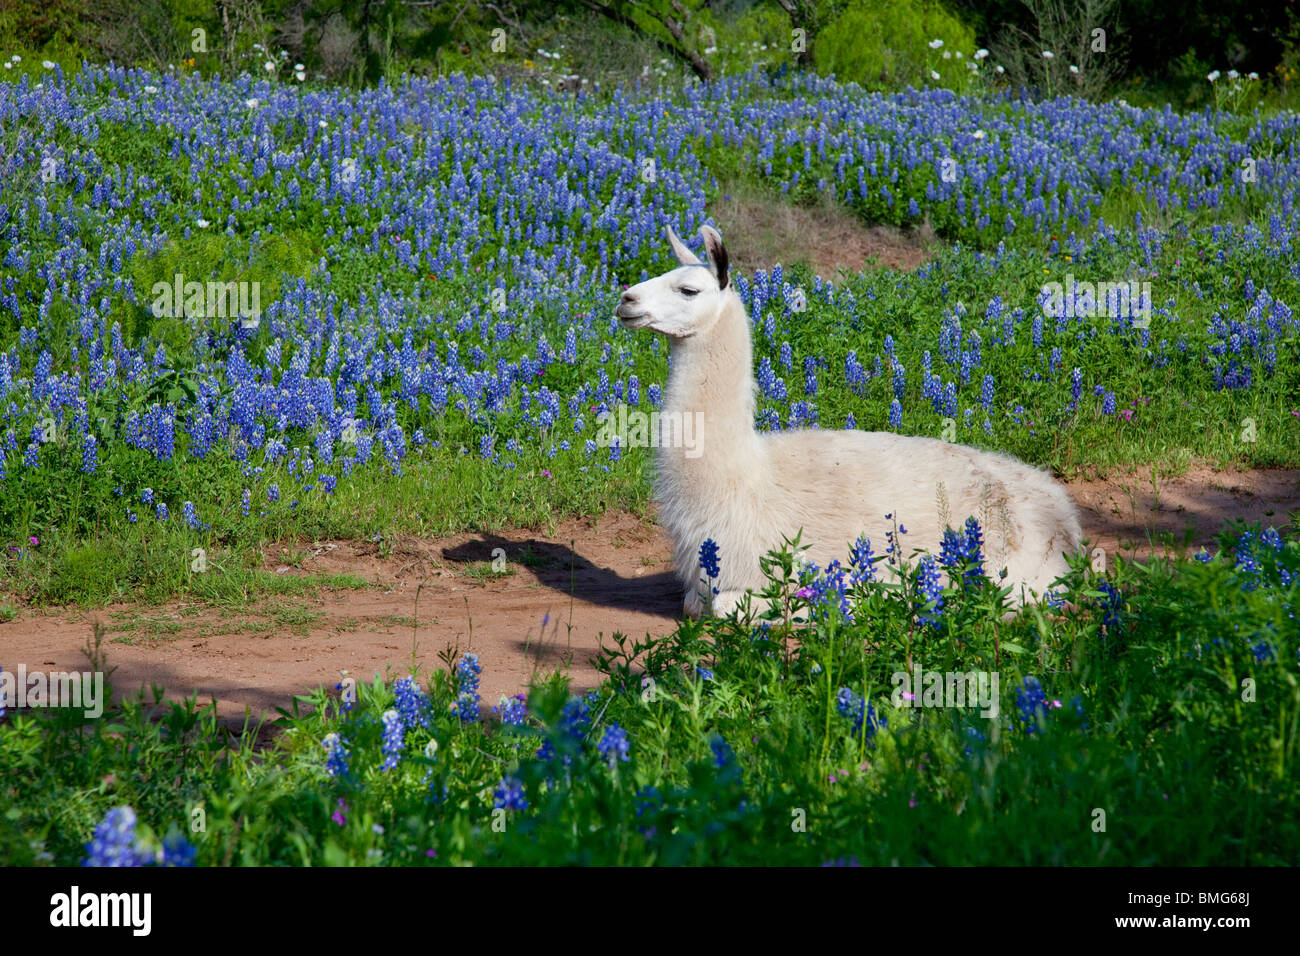 A llama animal with bluebonnet wildflowers in the hill country of Texas, USA. Stock Photo